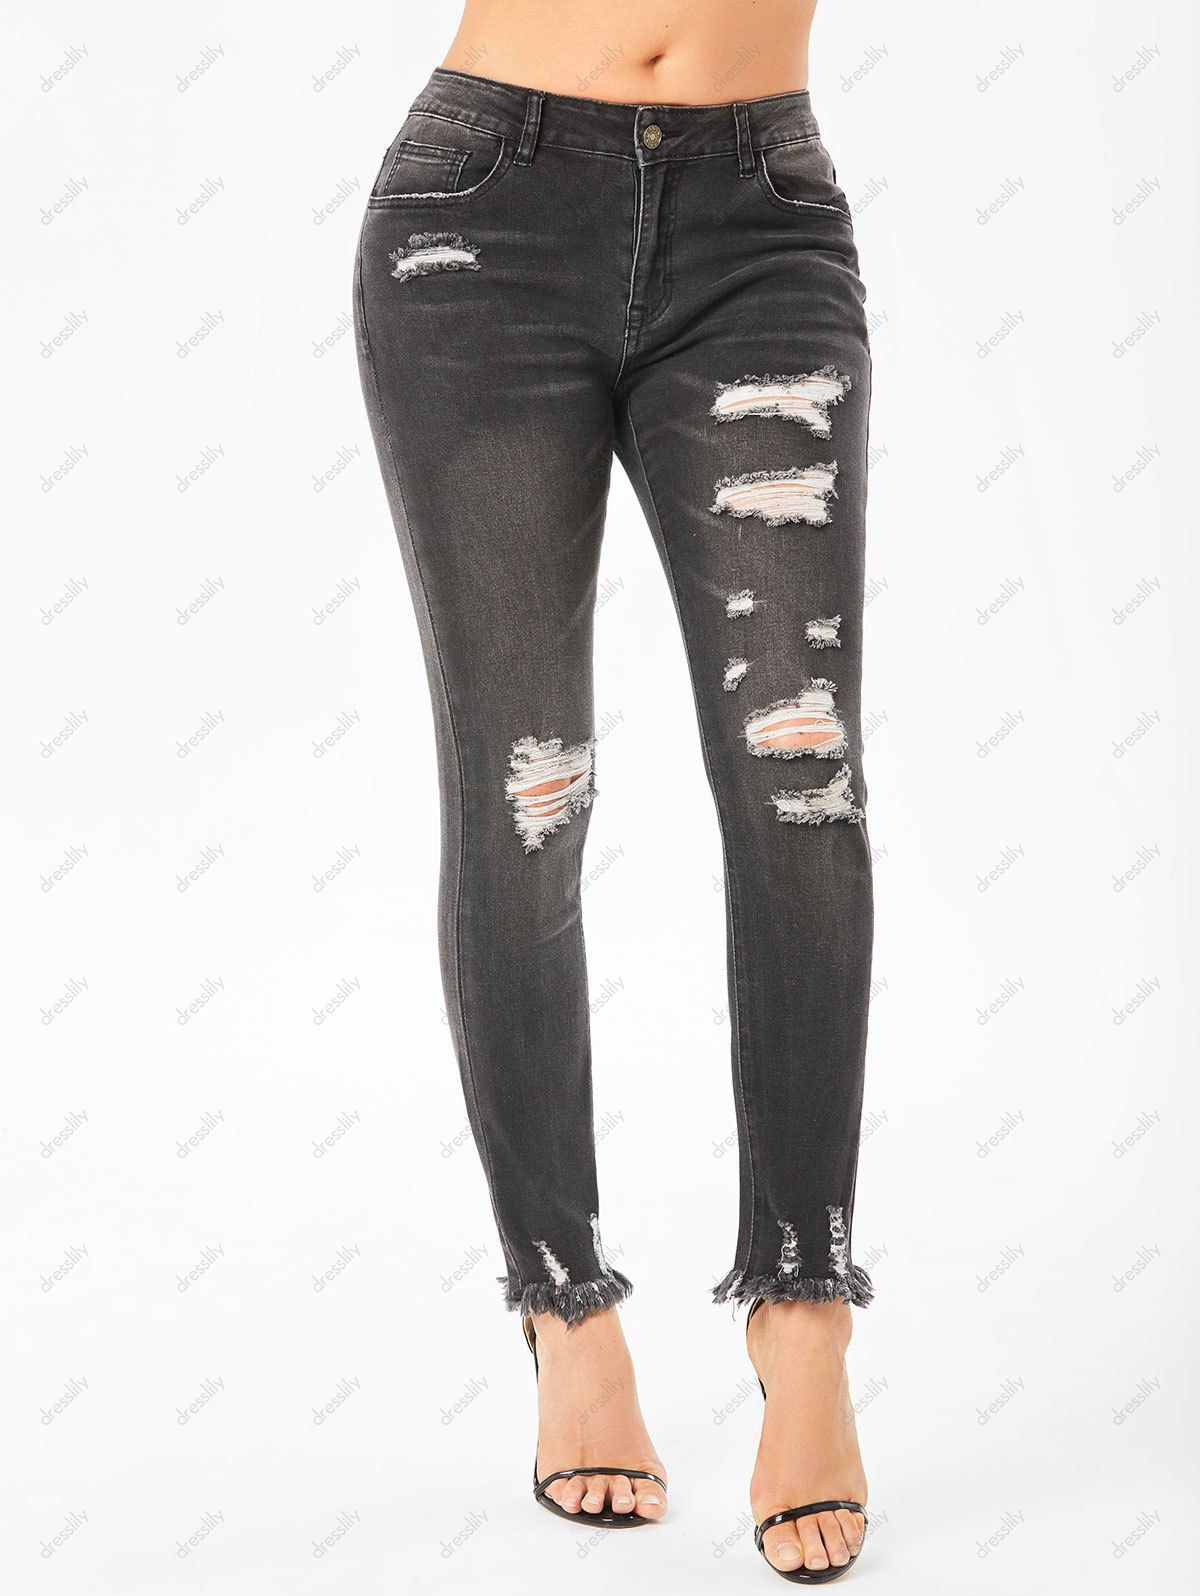 Ripped Frayed Distressed Skinny Jeans 